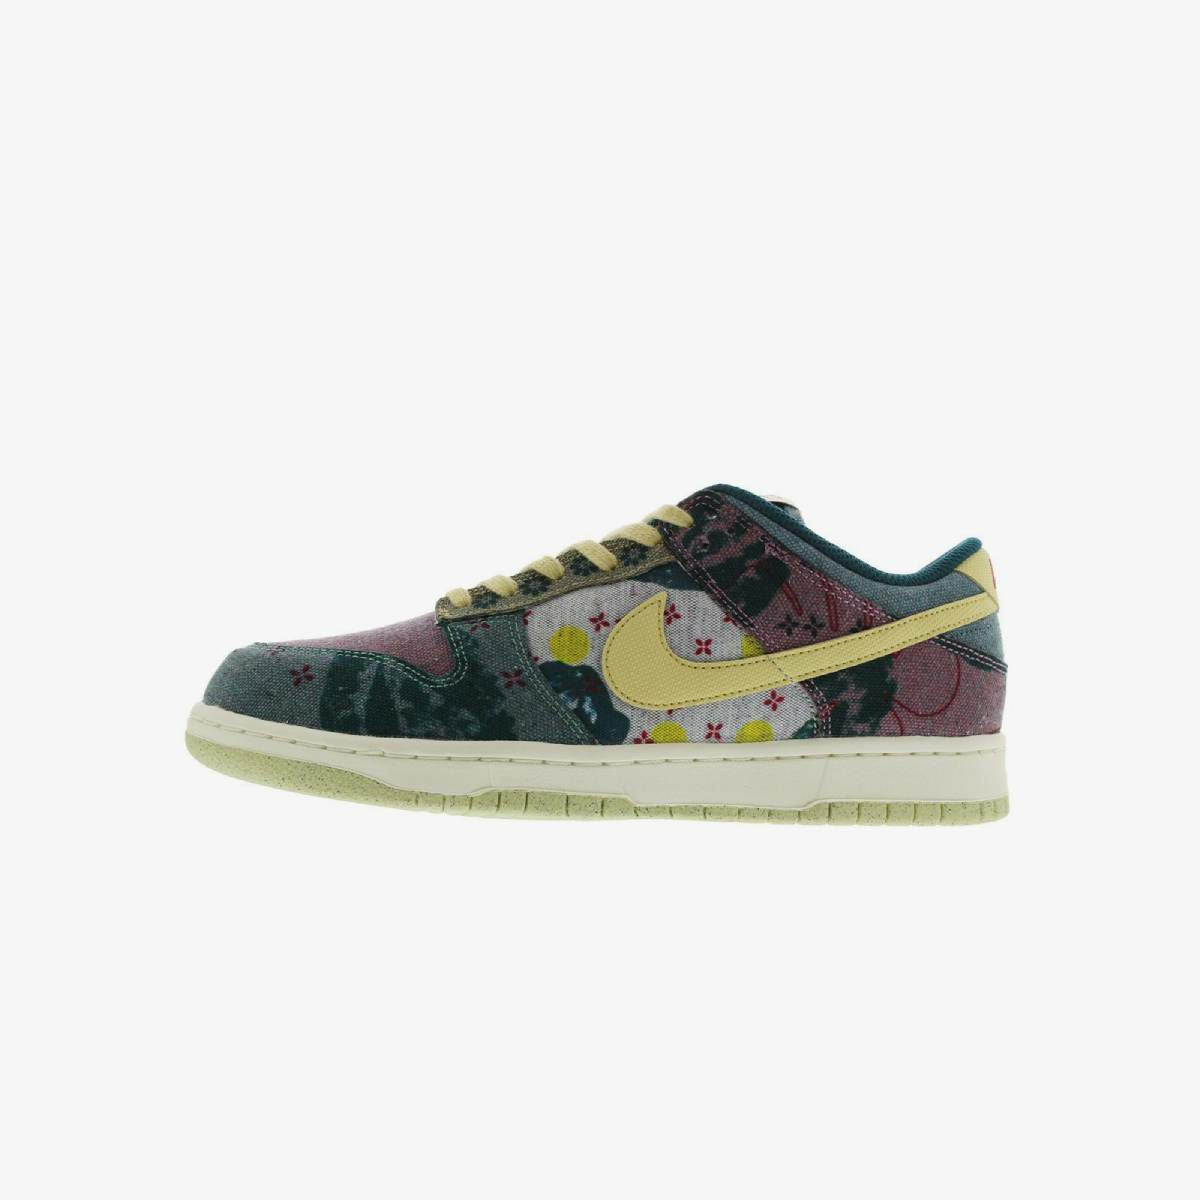 NIKE DUNK LOW SP MULTI COLOR/MIDNIGHT TURQUOISE/CARDINAL RED/LEMON